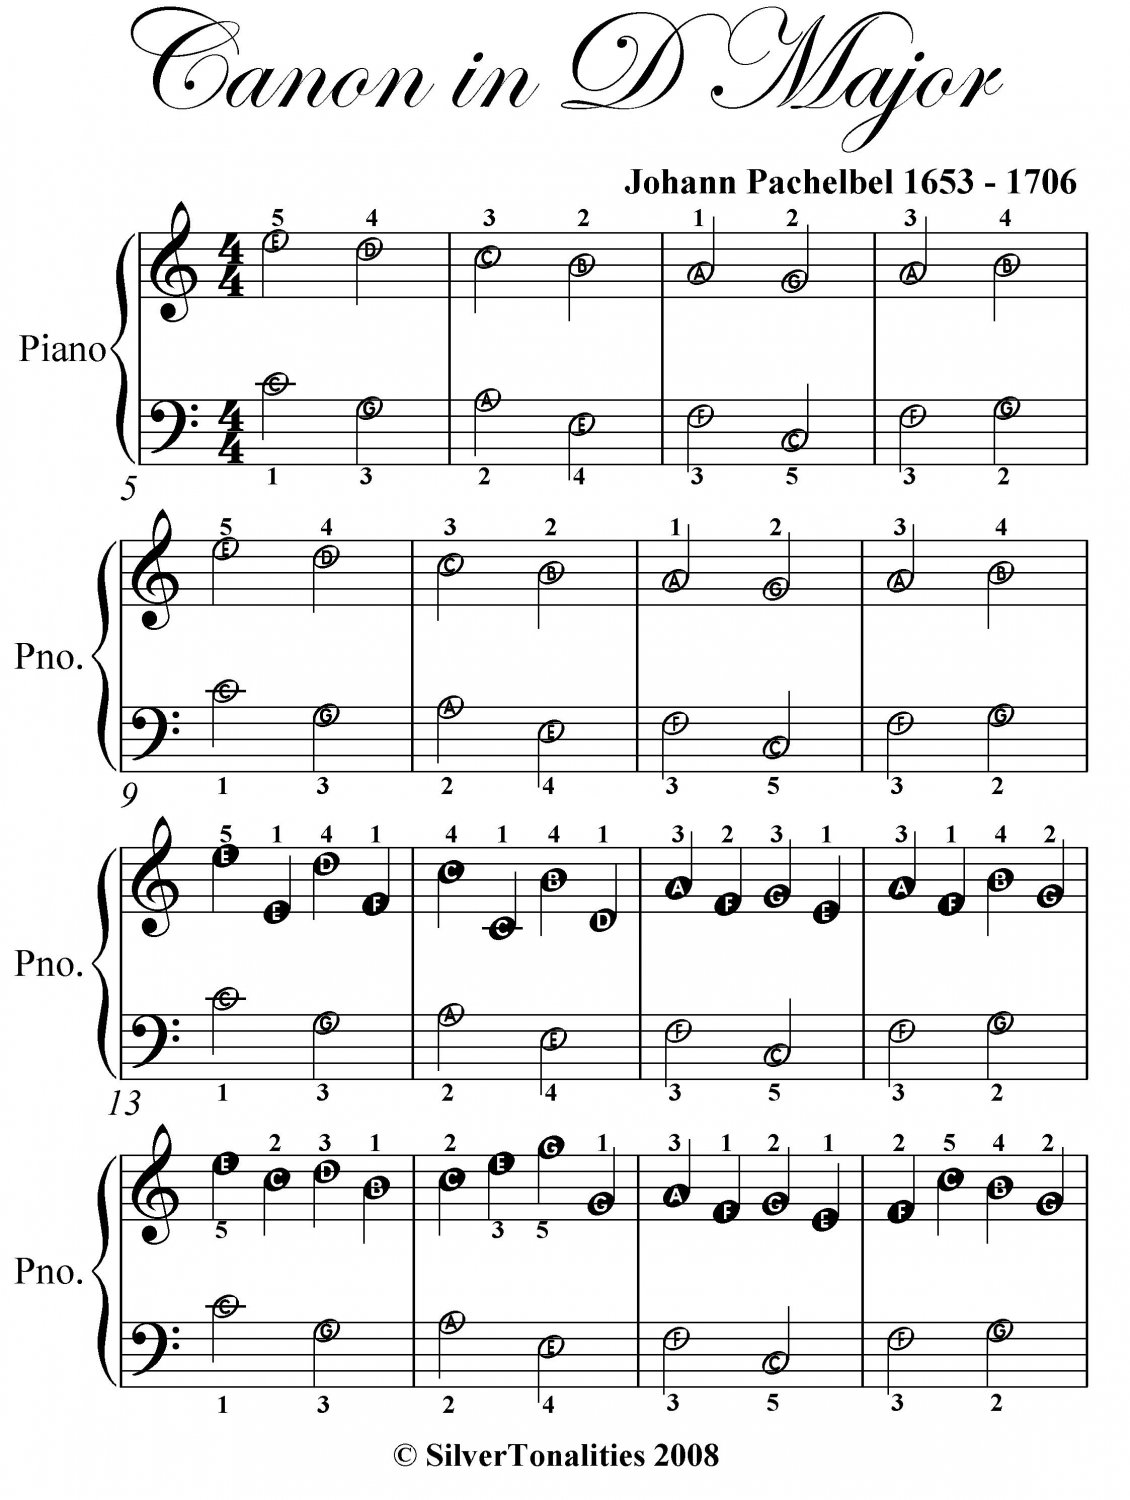 Canon in D Easiest Piano Sheet Music PDF